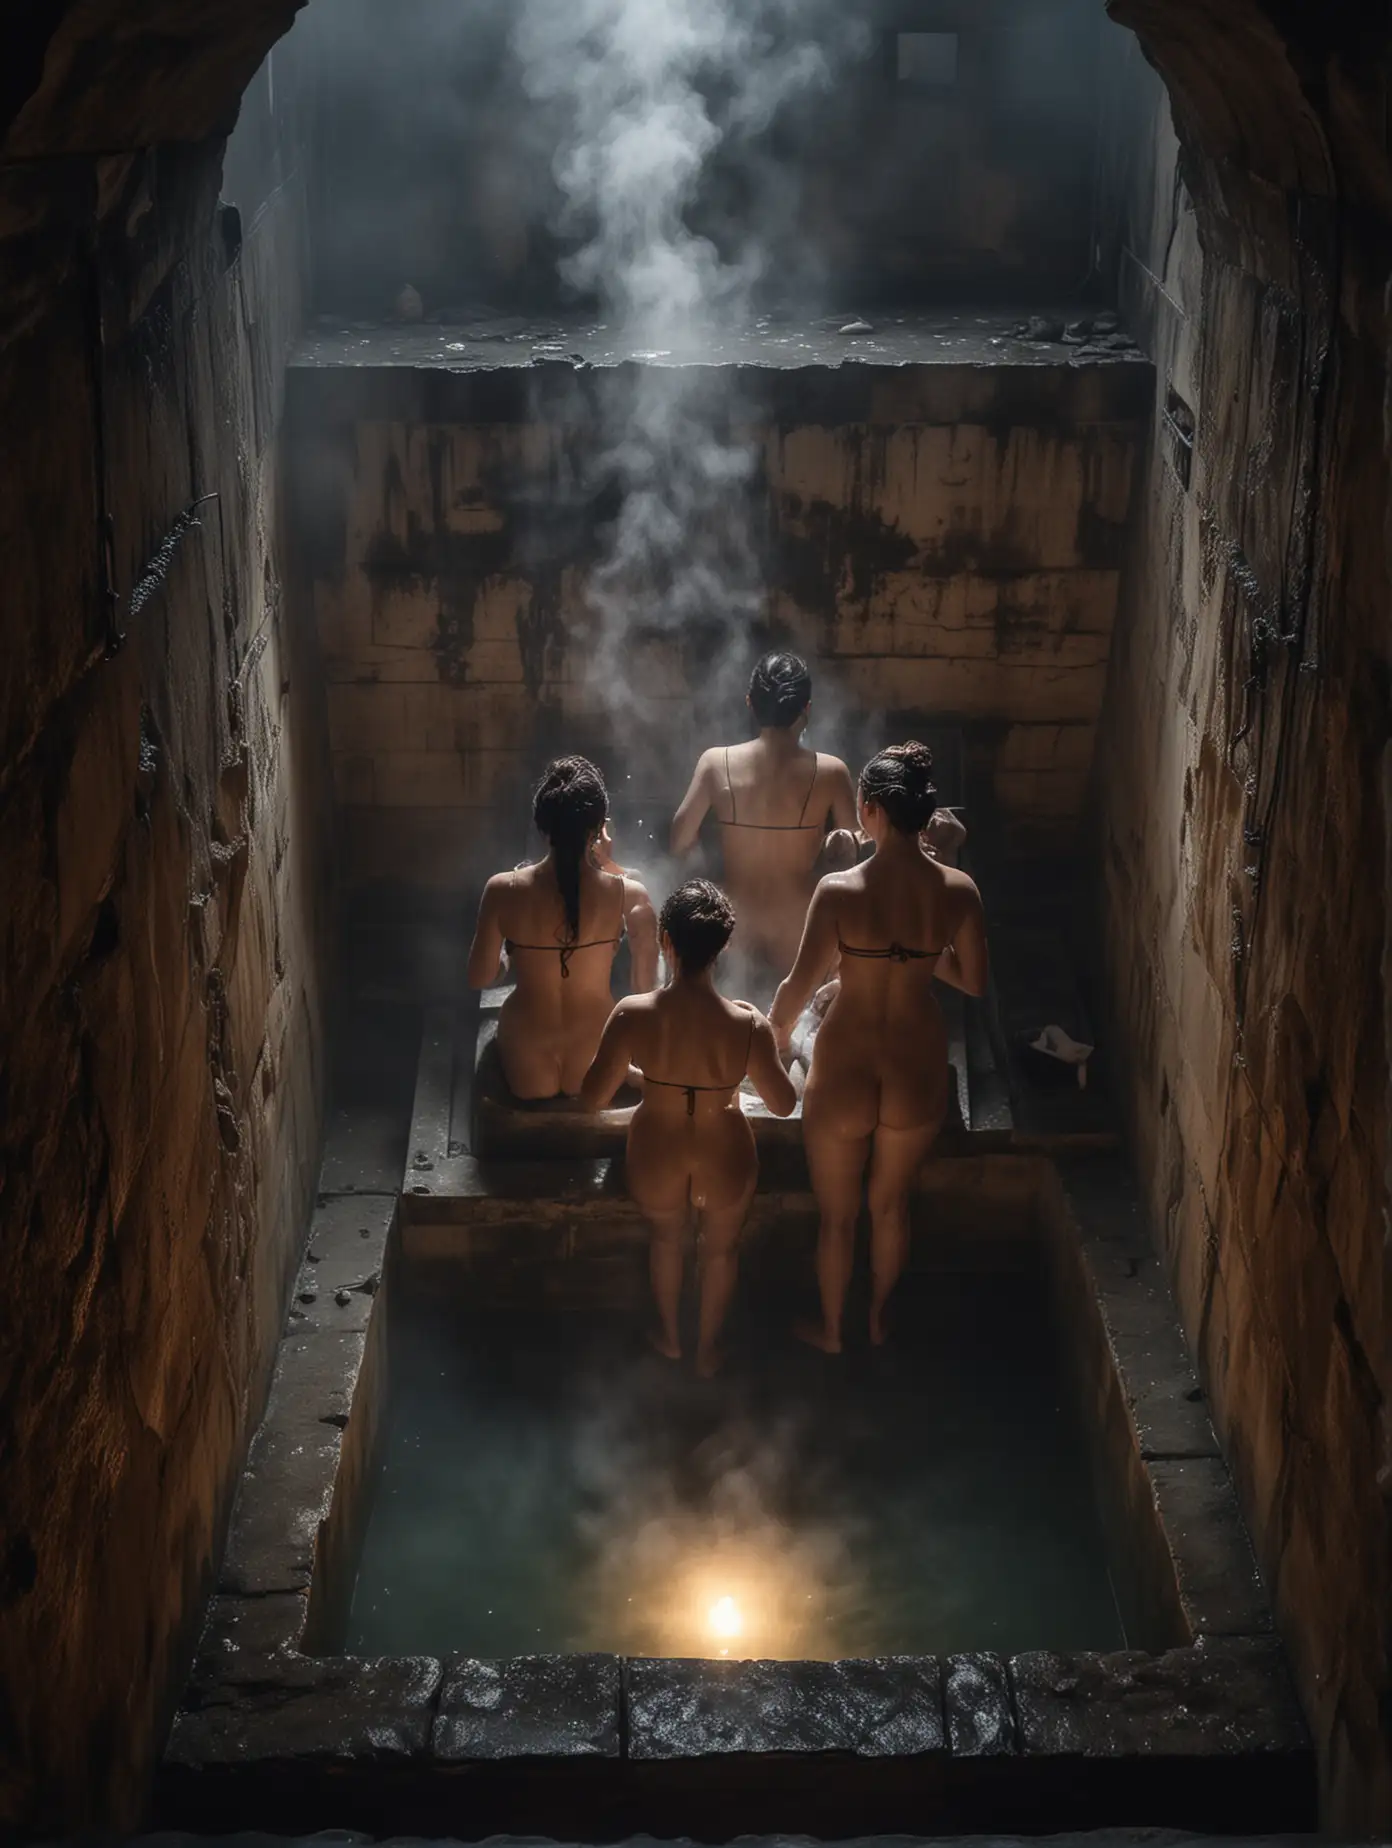 Three-Women-Bathing-in-a-Roman-Bath-at-Night-with-Steam-and-Mist